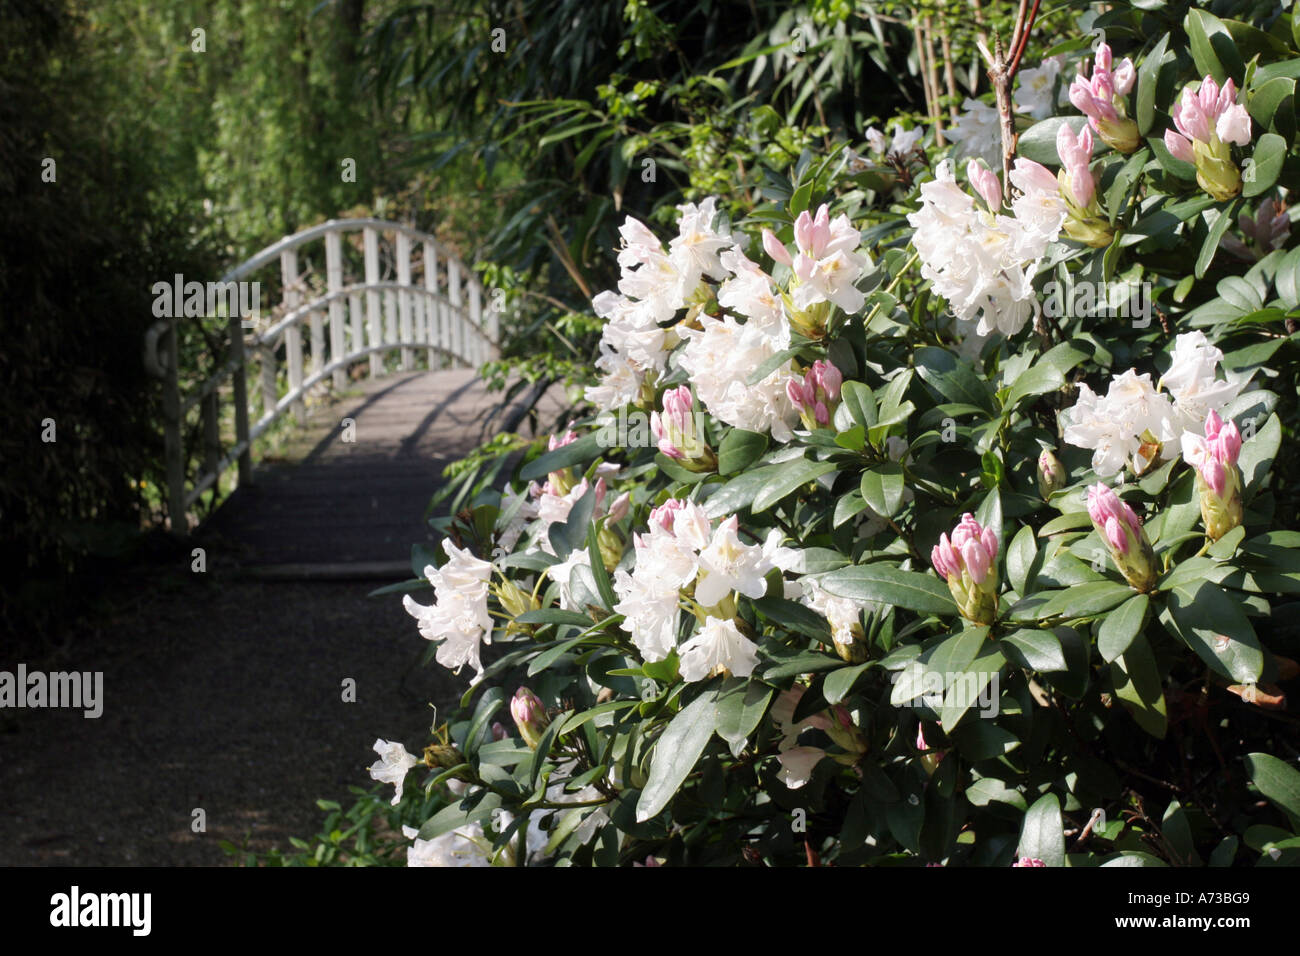 white-flowered rhododendron (Rhododendron albiflorum), blooming bush in front of wooden bridge Stock Photo